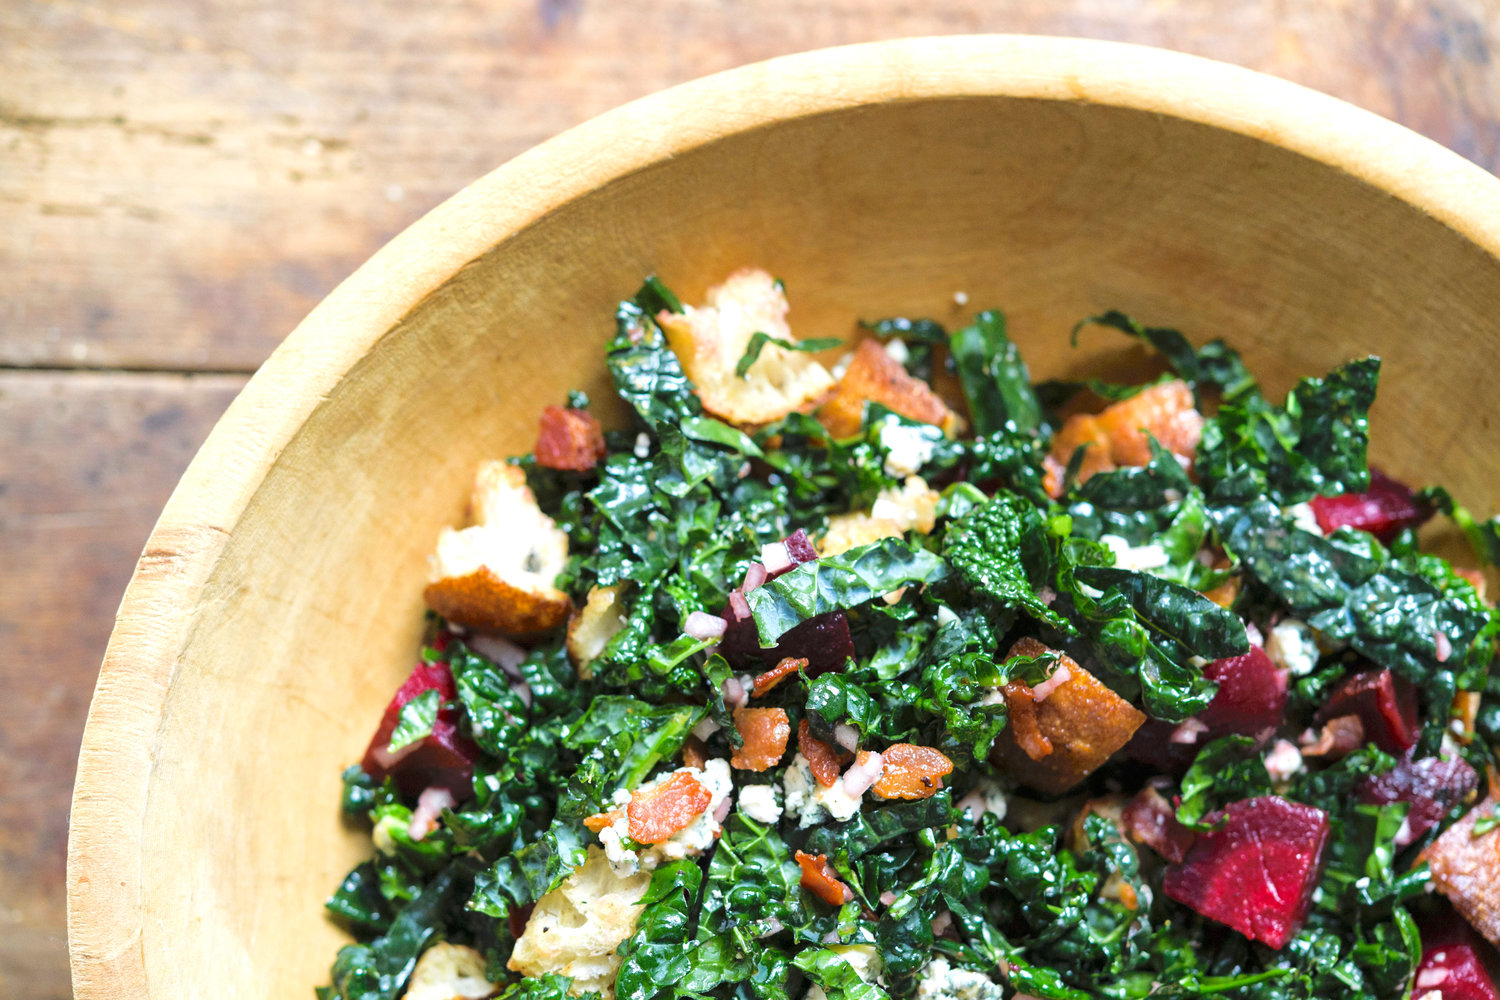 Tame tough kale — Bread Salad with kale, beets and blue cheese